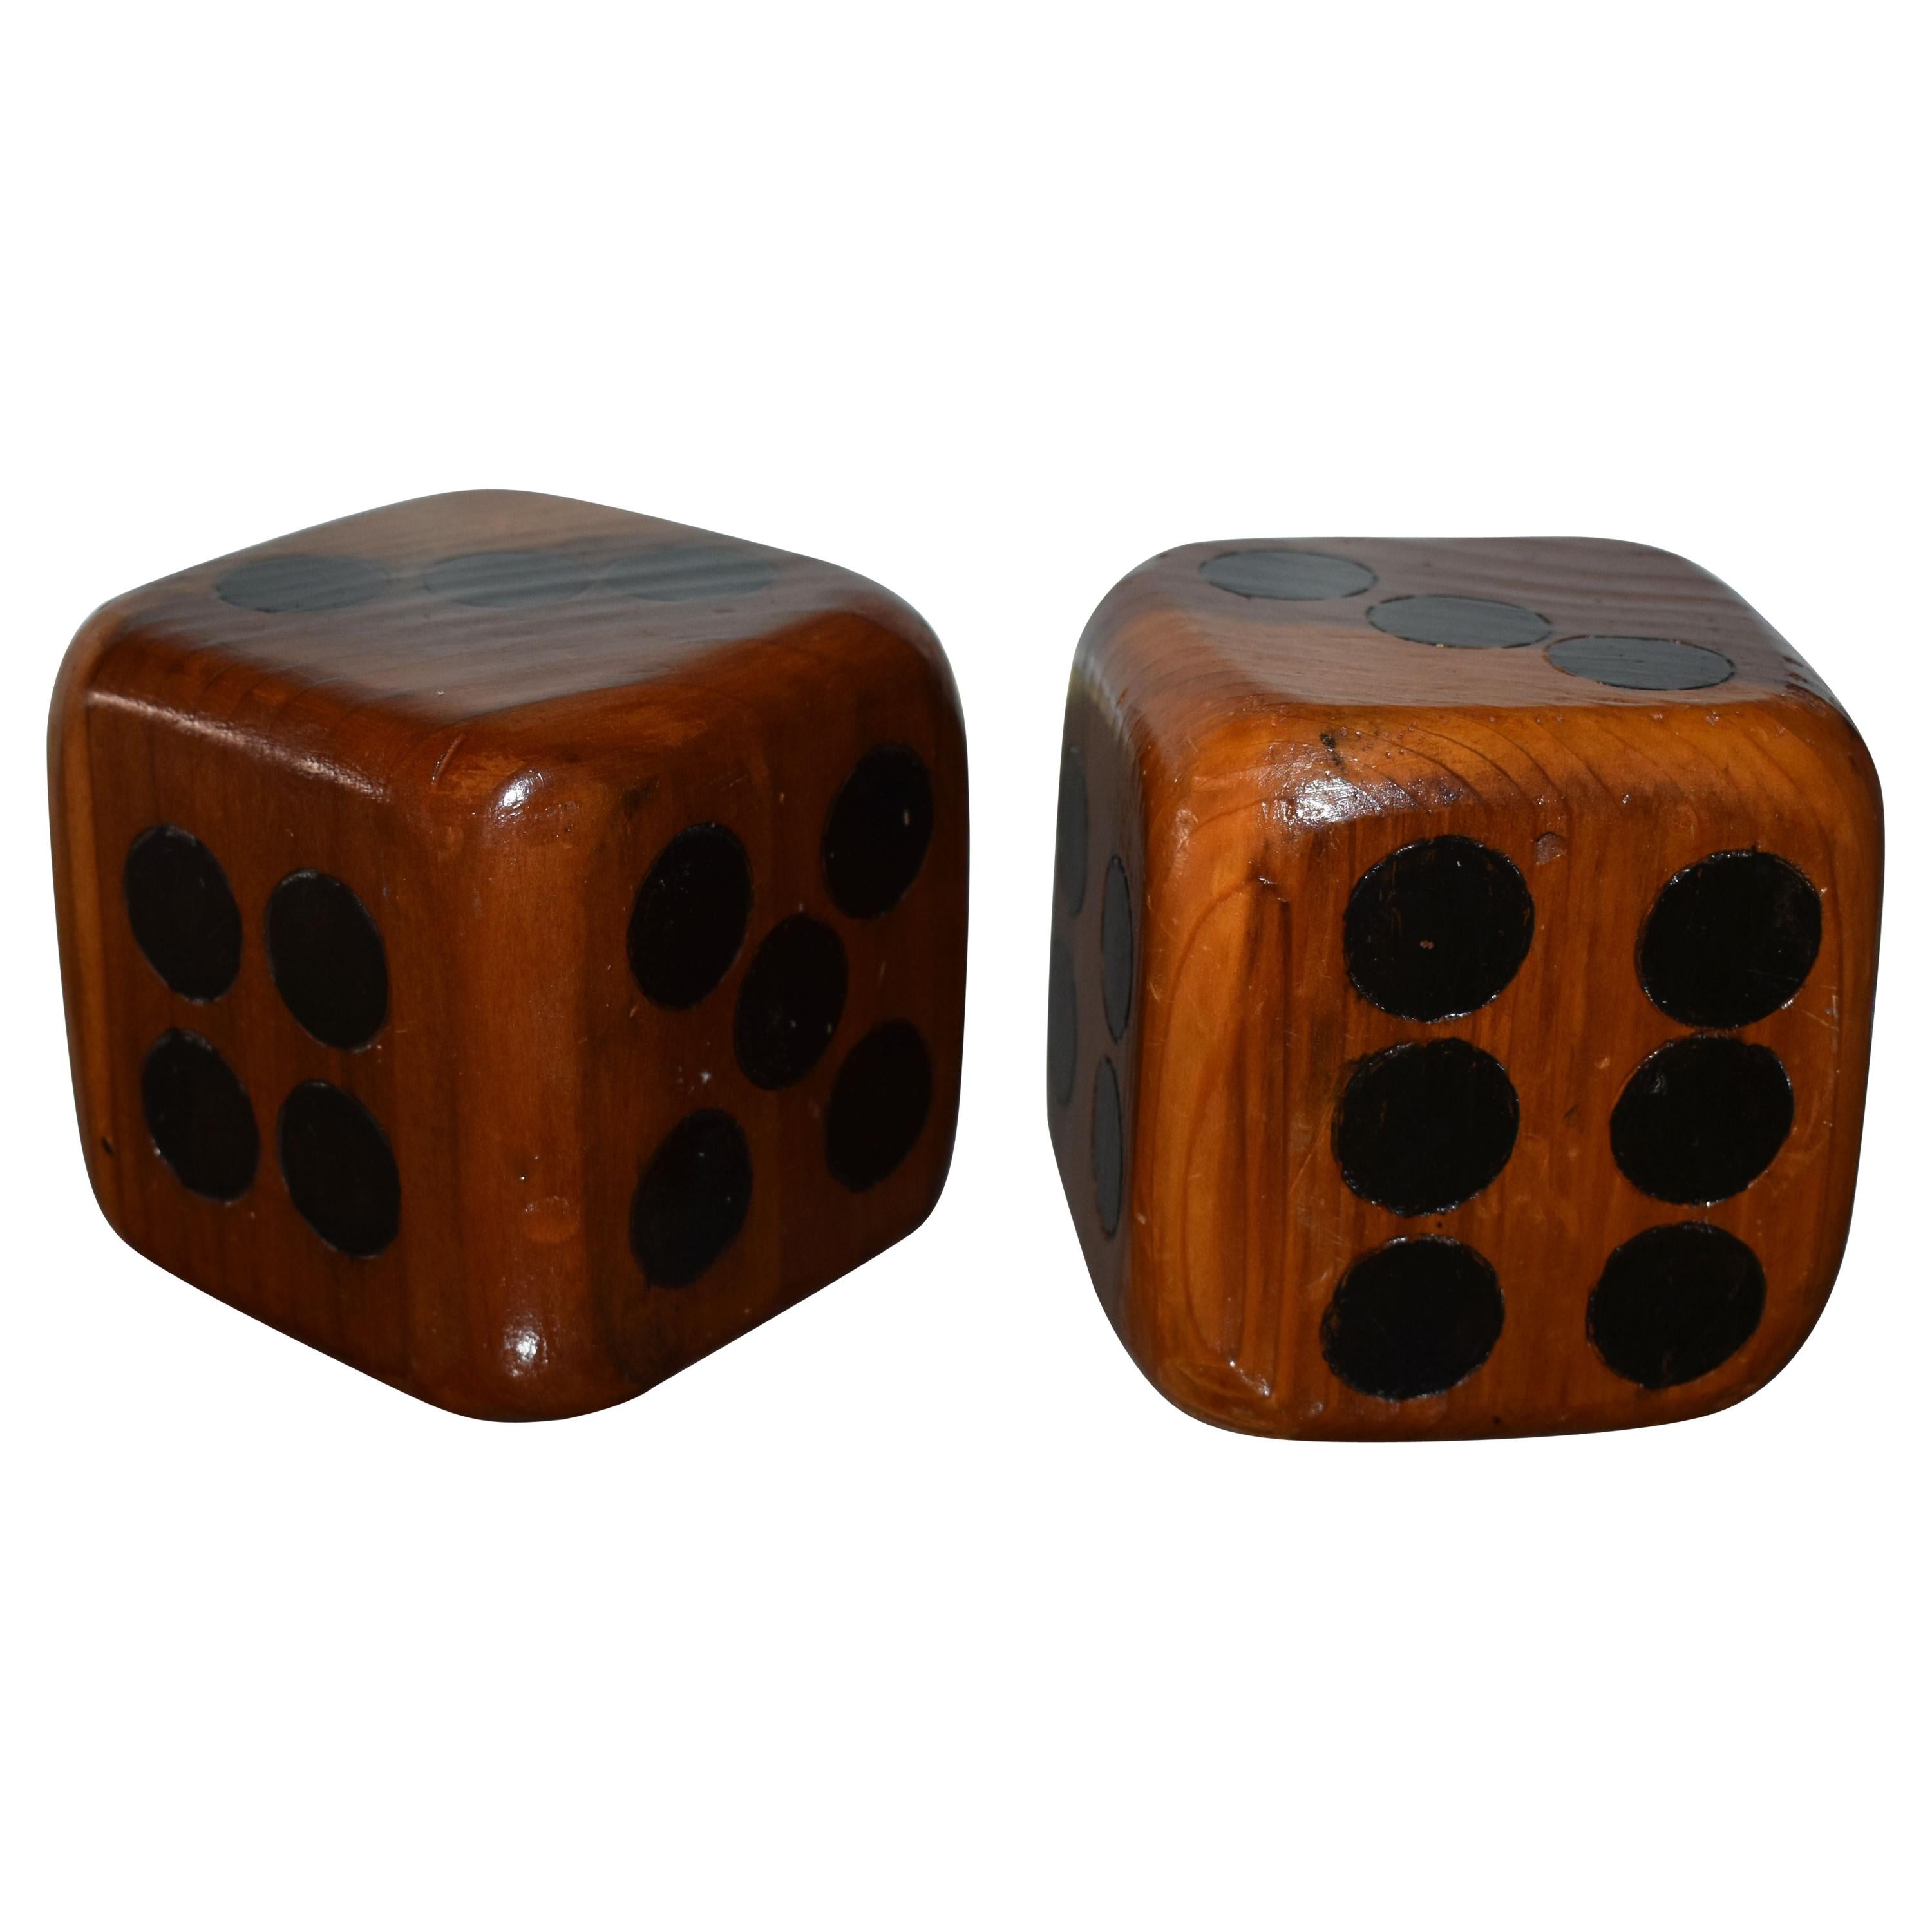 Pair of Large Wooden Dices Paperweight